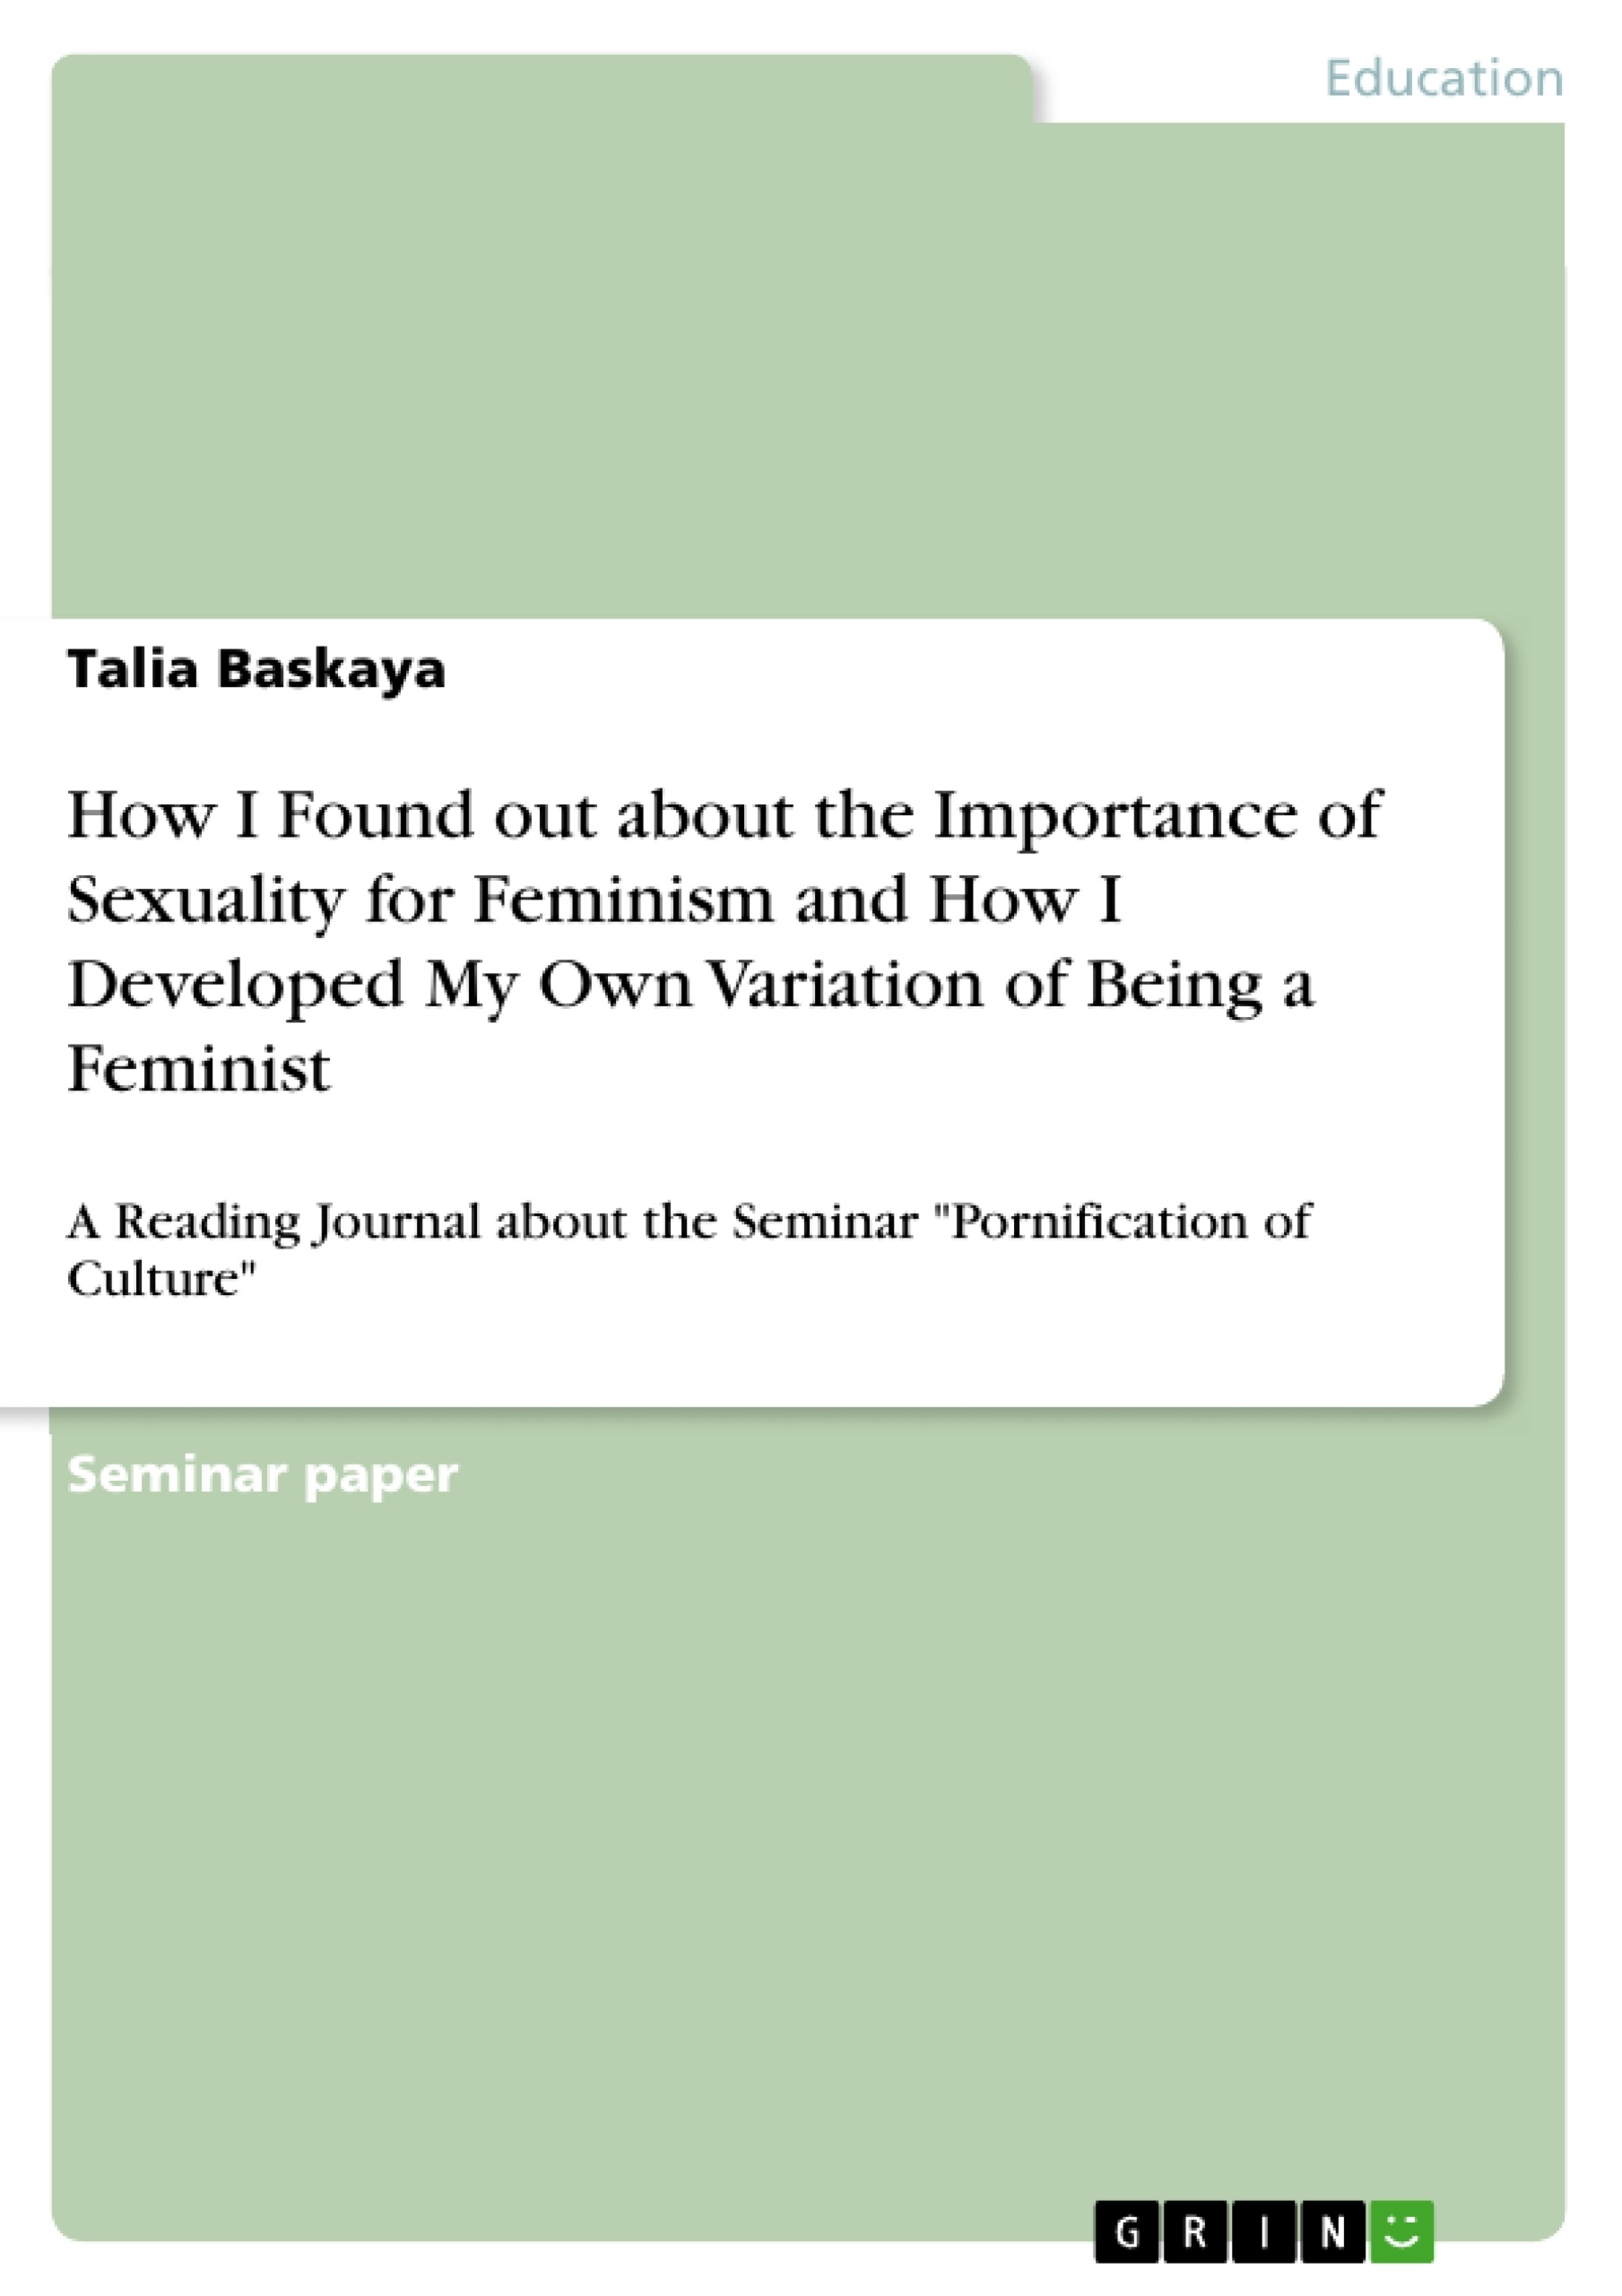 Titre: How I Found out about the Importance of Sexuality for Feminism and How I Developed My Own Variation of Being a Feminist